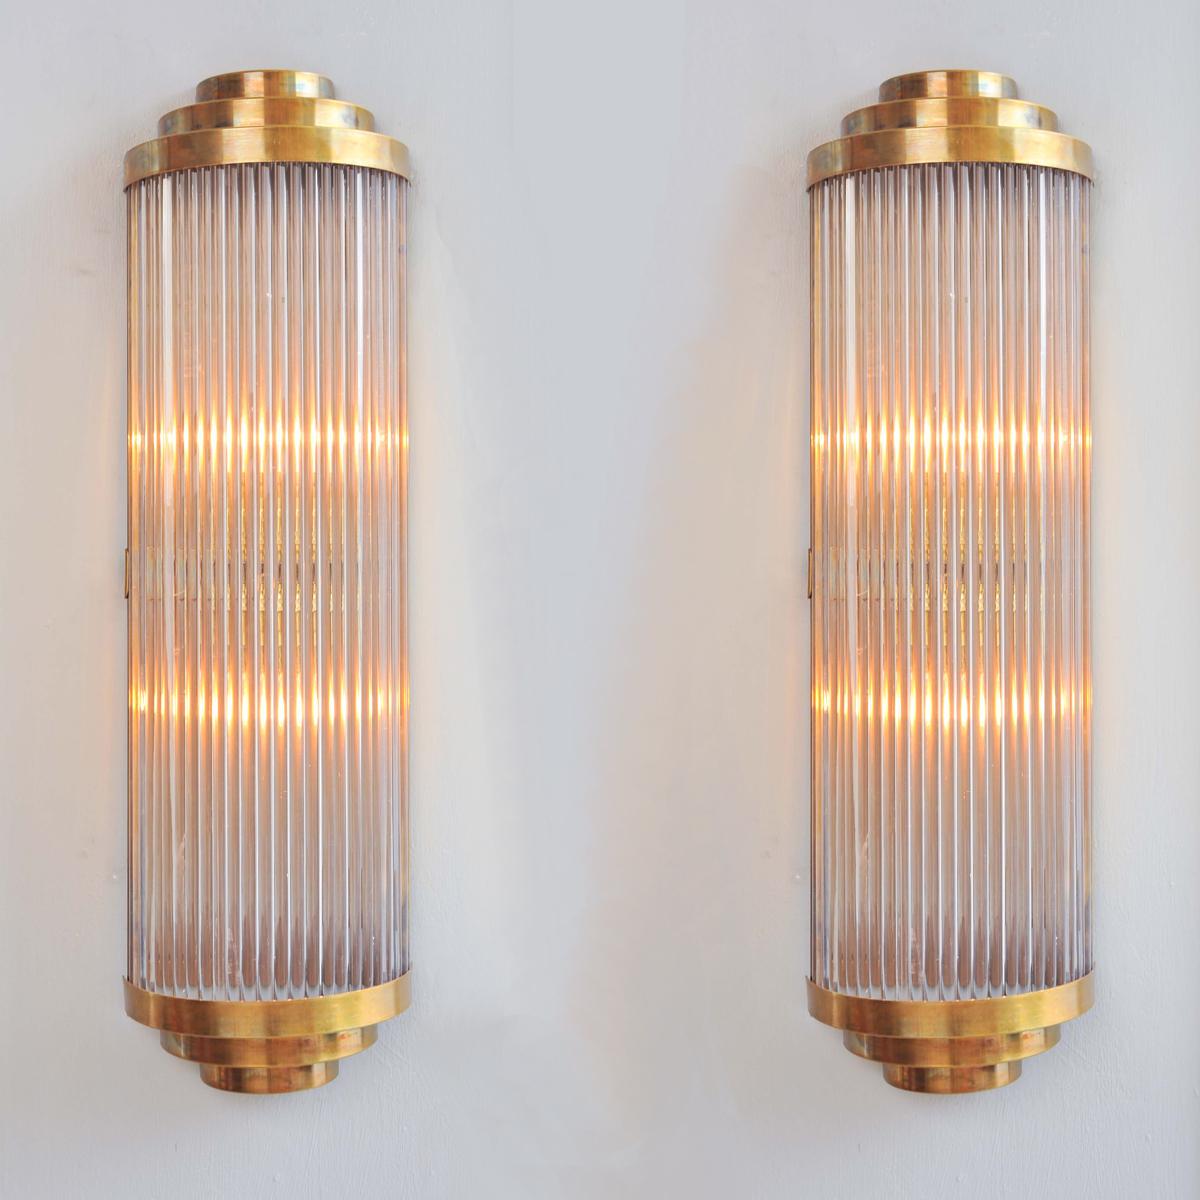 This ‘Ravello’ wall light takes its inspiration from a timelessly classic Art Deco design.
Multiple Italian glass rods form a semi-circle which is capped, top and bottom by 3 tiers of curved brass. The brass back plate holds two light bulbs and